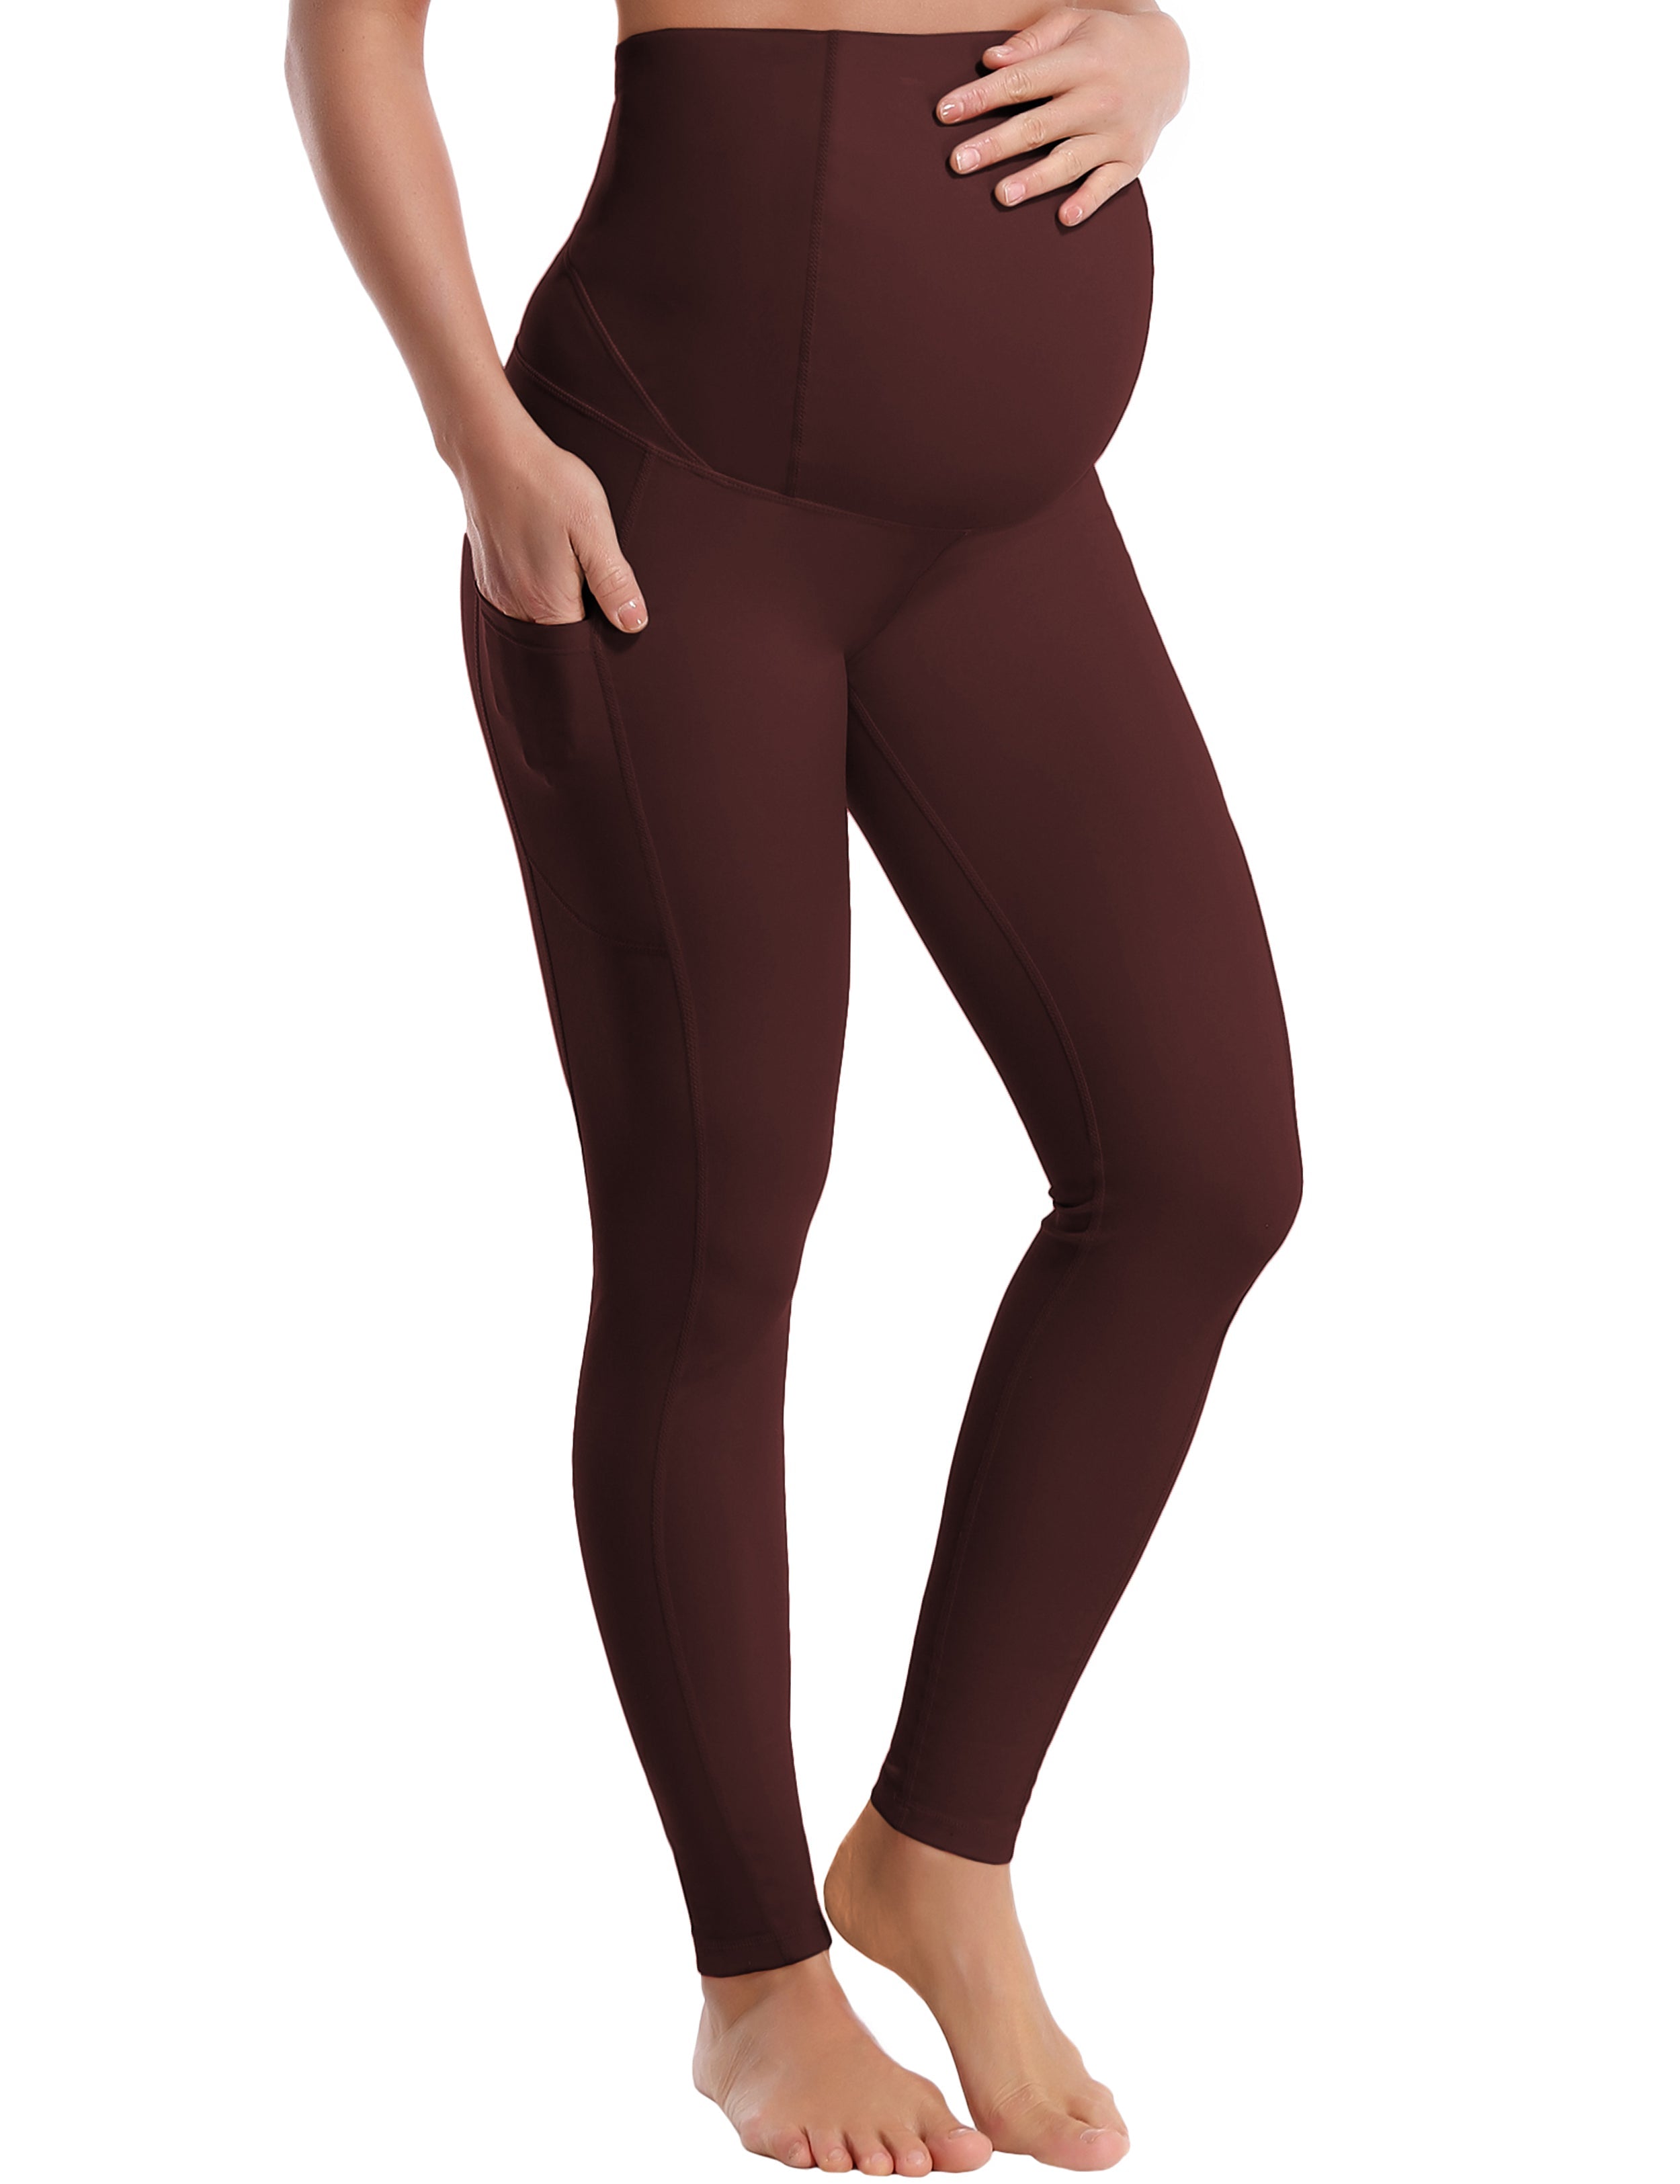 26" Side Pockets Maternity Tall Size Pants mahoganymaroon 87%Nylon/13%Spandex Softest-ever fabric High elasticity 4-way stretch Fabric doesn't attract lint easily No see-through Moisture-wicking Machine wash